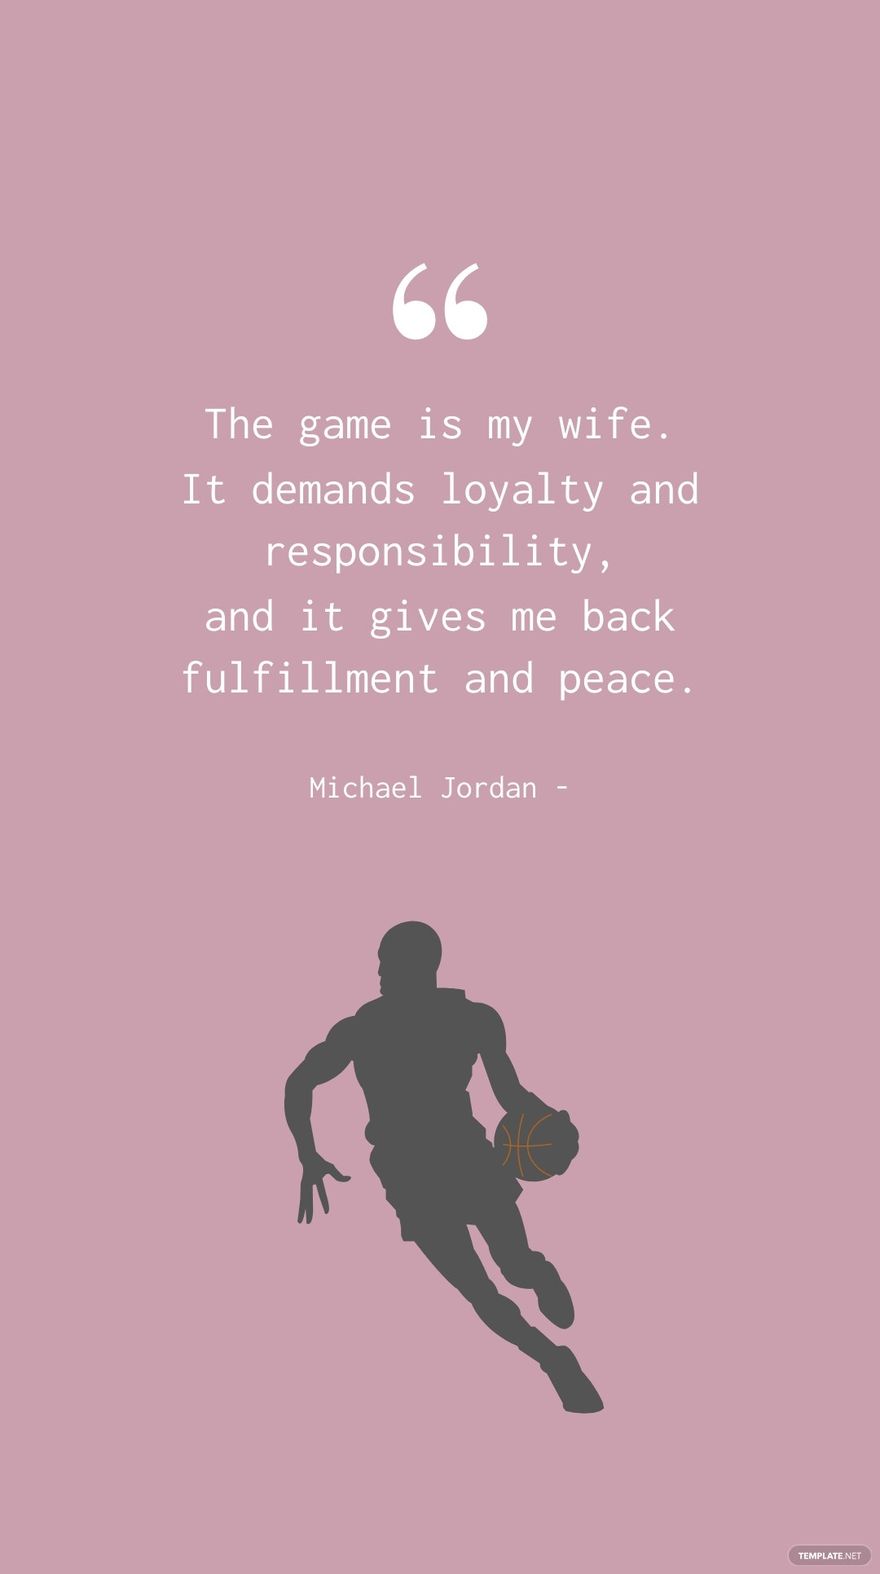 Michael Jordan - The game is my wife. It demands loyalty and responsibility, and it gives me back fulfillment and peace. in JPG